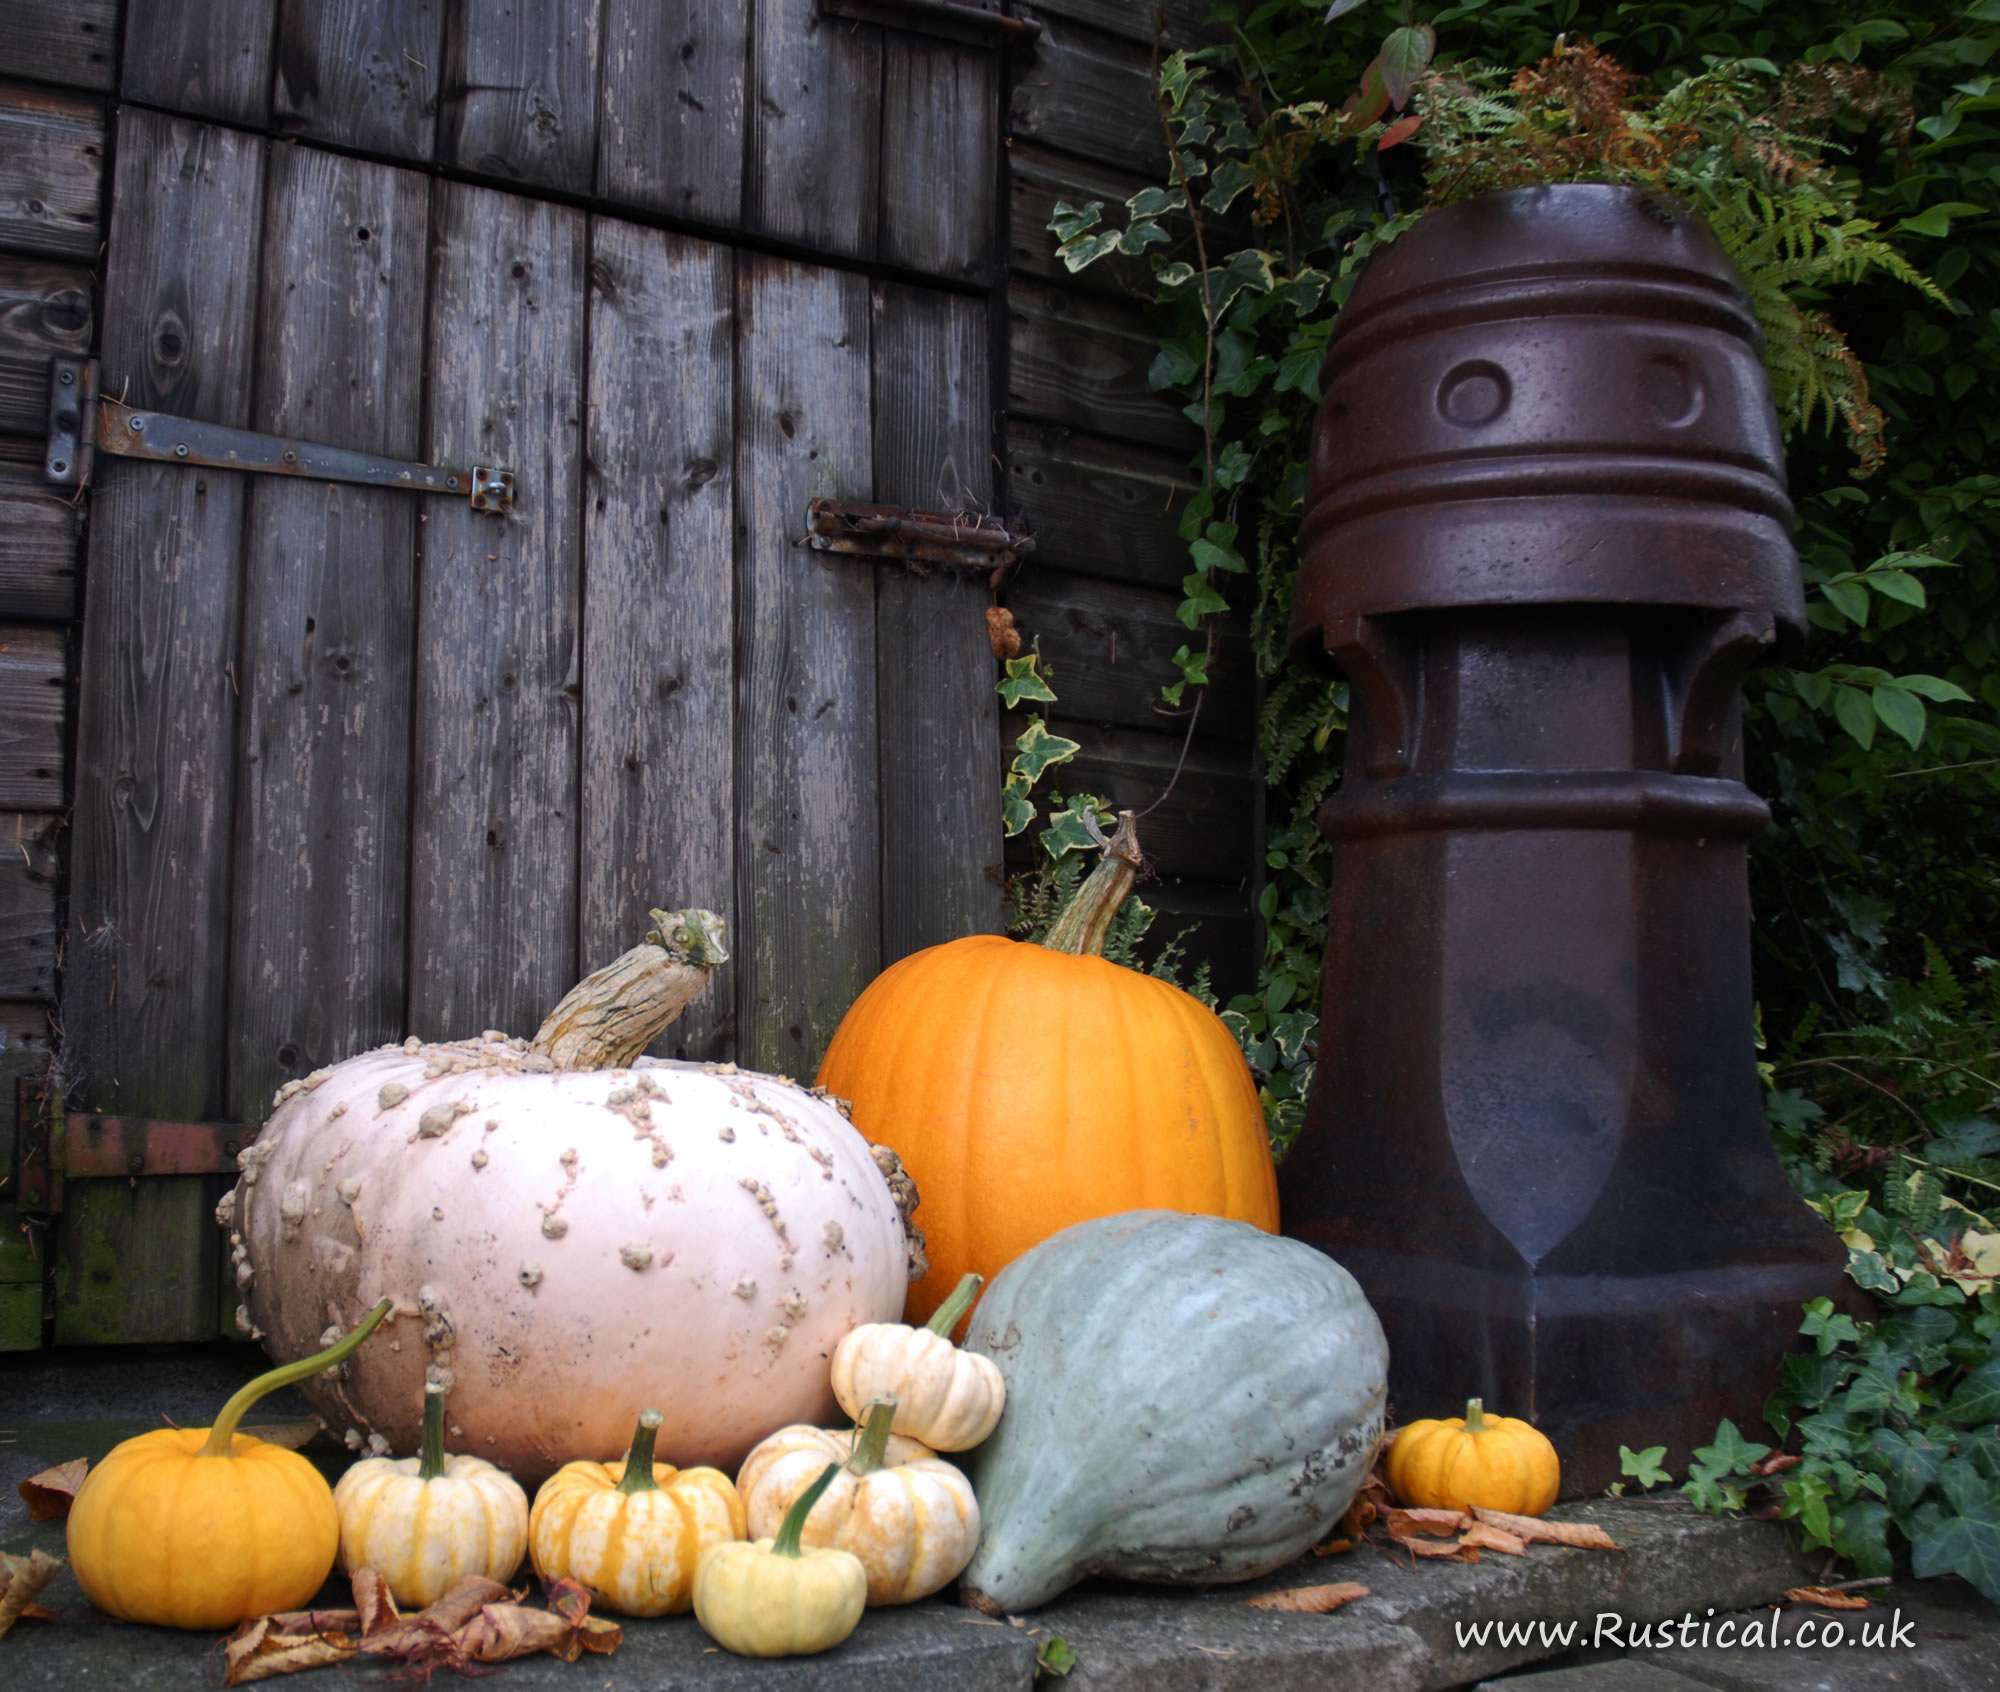 A selection of pumpkins outside our wood shed